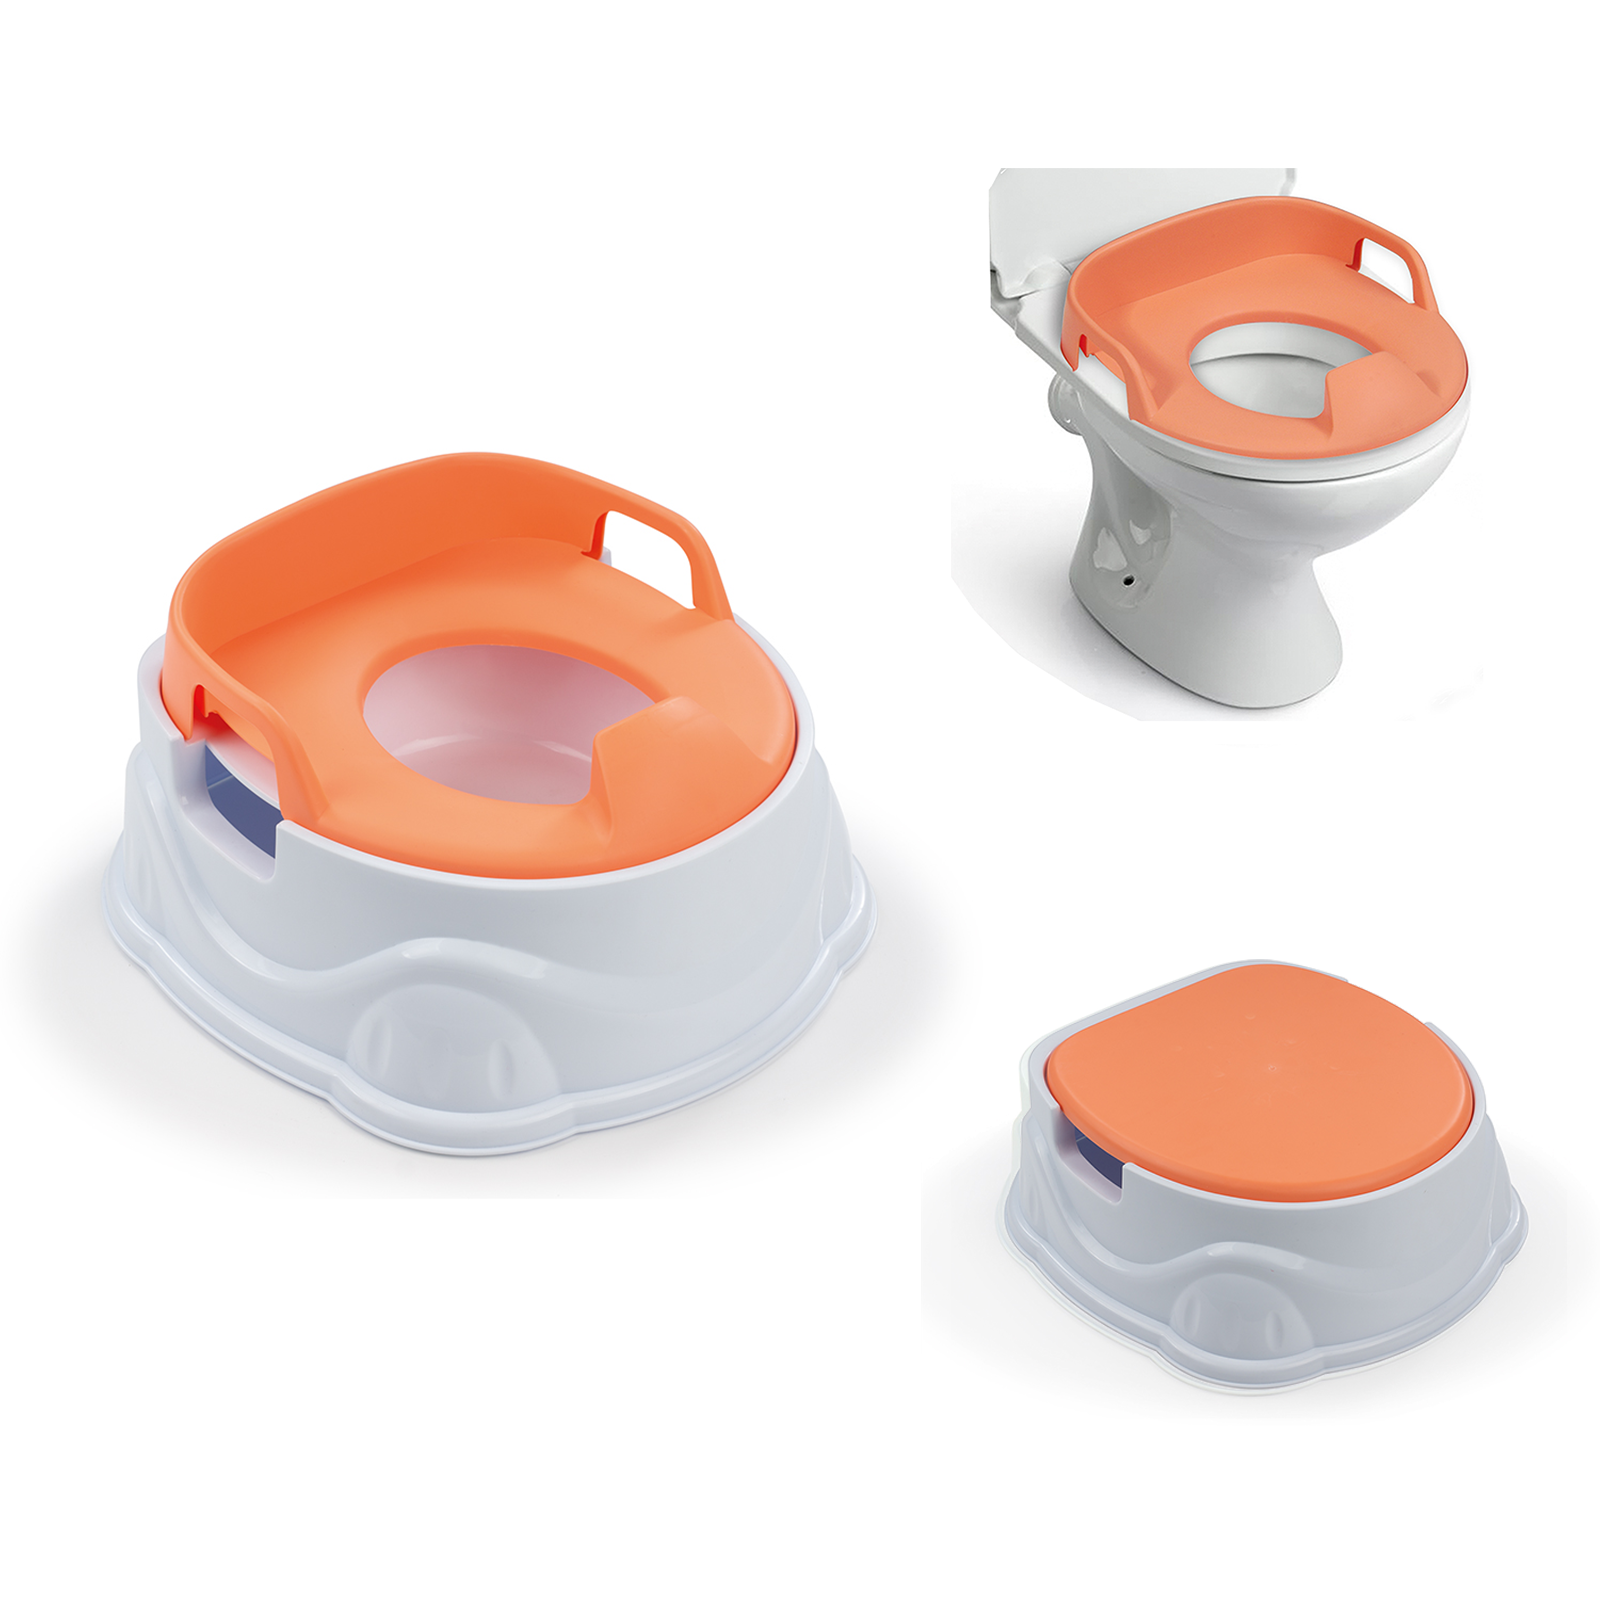 Kids 3 in 1 Potty, Toilet Seat and Step Stool - Orange